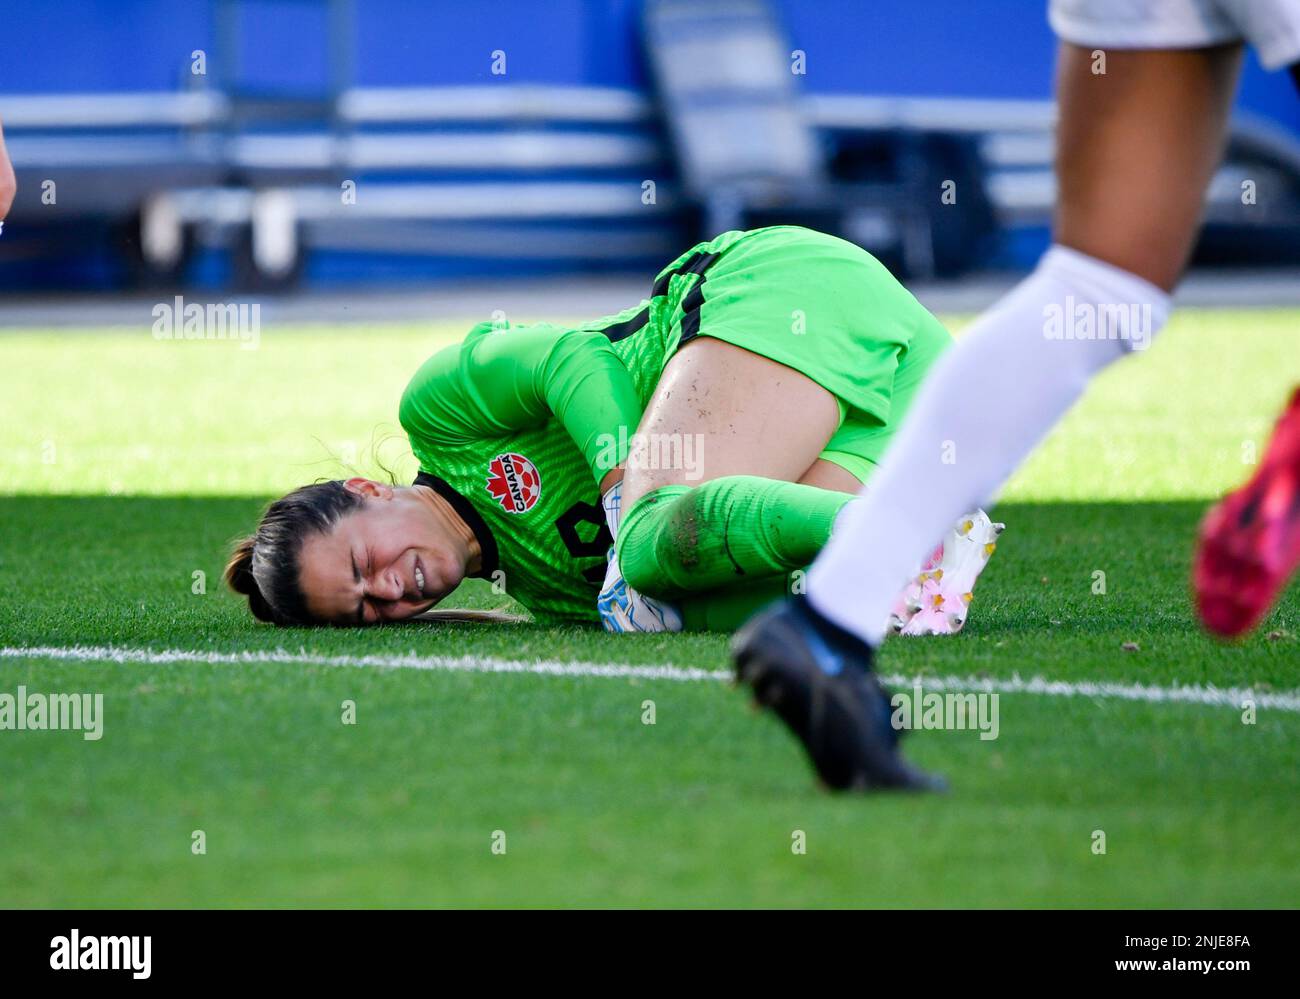 Feb 22, 2023: Canada National Team goalkeeper Sabrina D'Angelo (18) is injured in the first half during the SheBelieves Cup soccer game between the U.S. Women's National Team and Brazil Women's National Team at Toyota Stadium in Frisco, Texas, Albert Pena/CSM Stock Photo